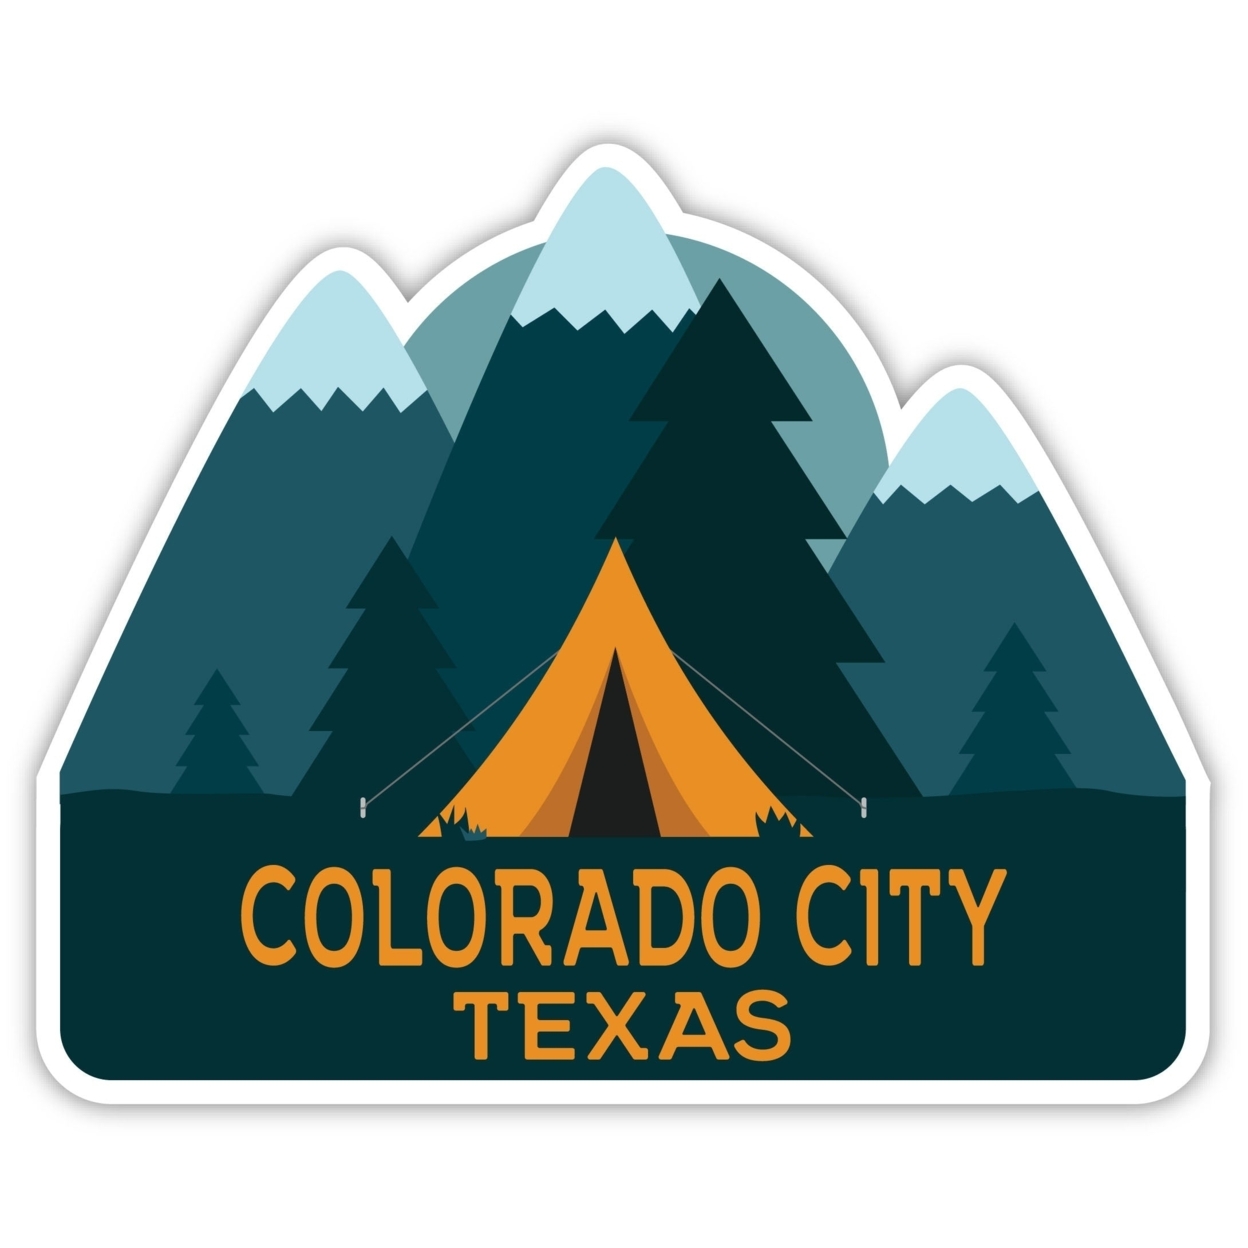 Colorado City Texas Souvenir Decorative Stickers (Choose Theme And Size) - 4-Pack, 2-Inch, Tent